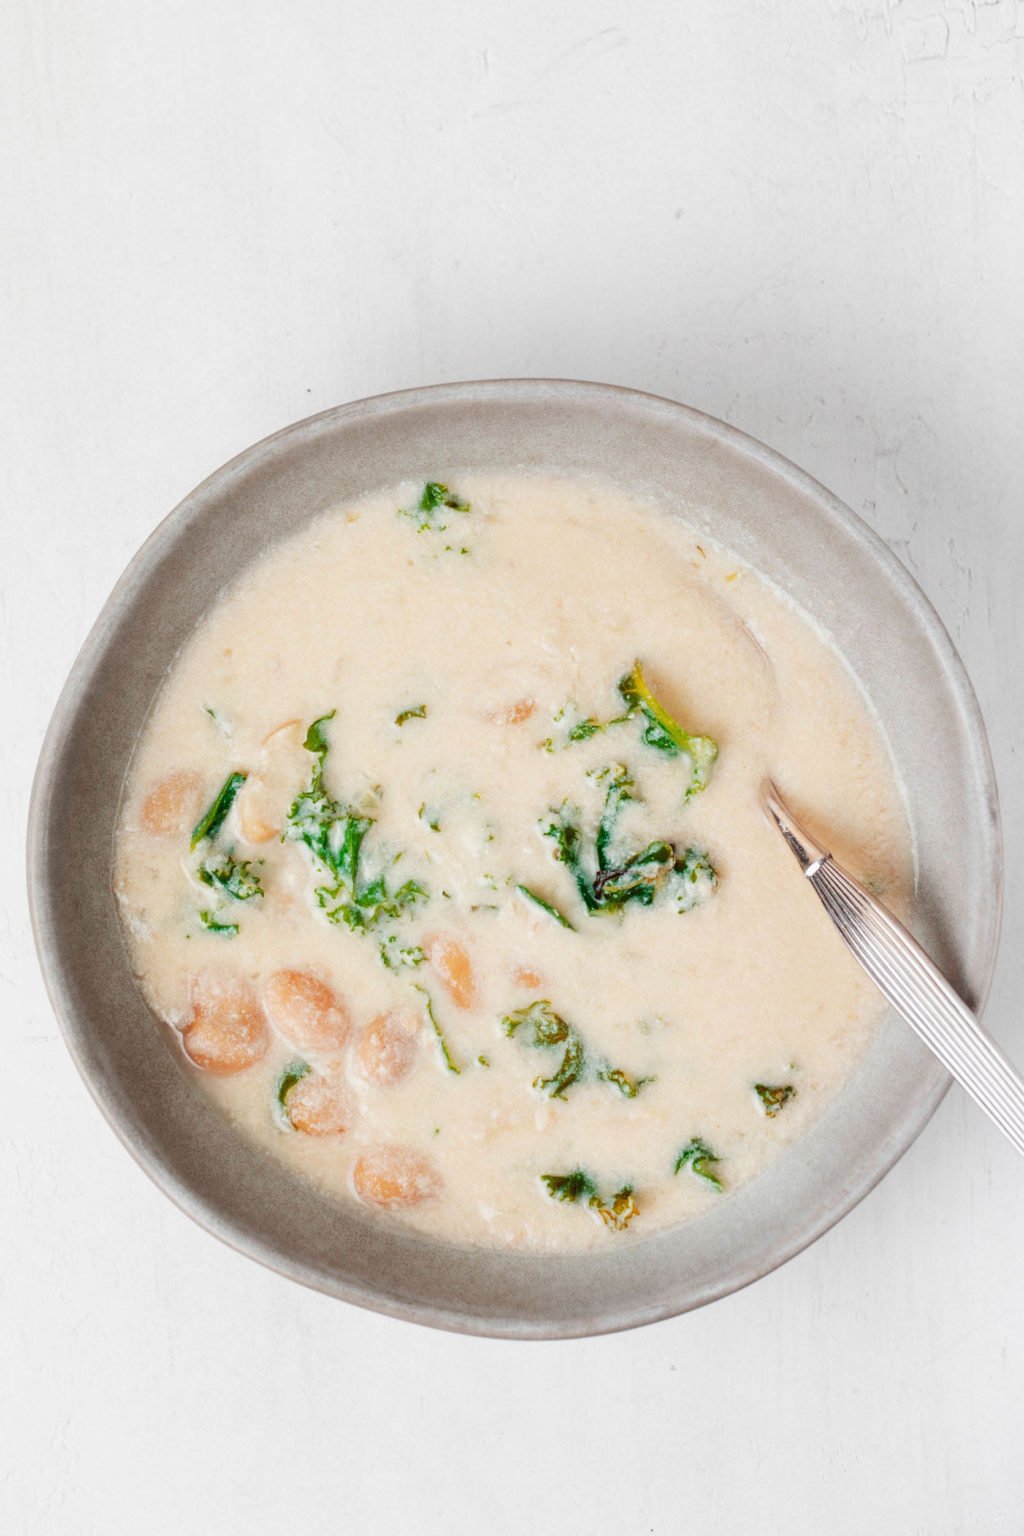 An overhead image of a cream soup, which is flecked with green pieces of kale.